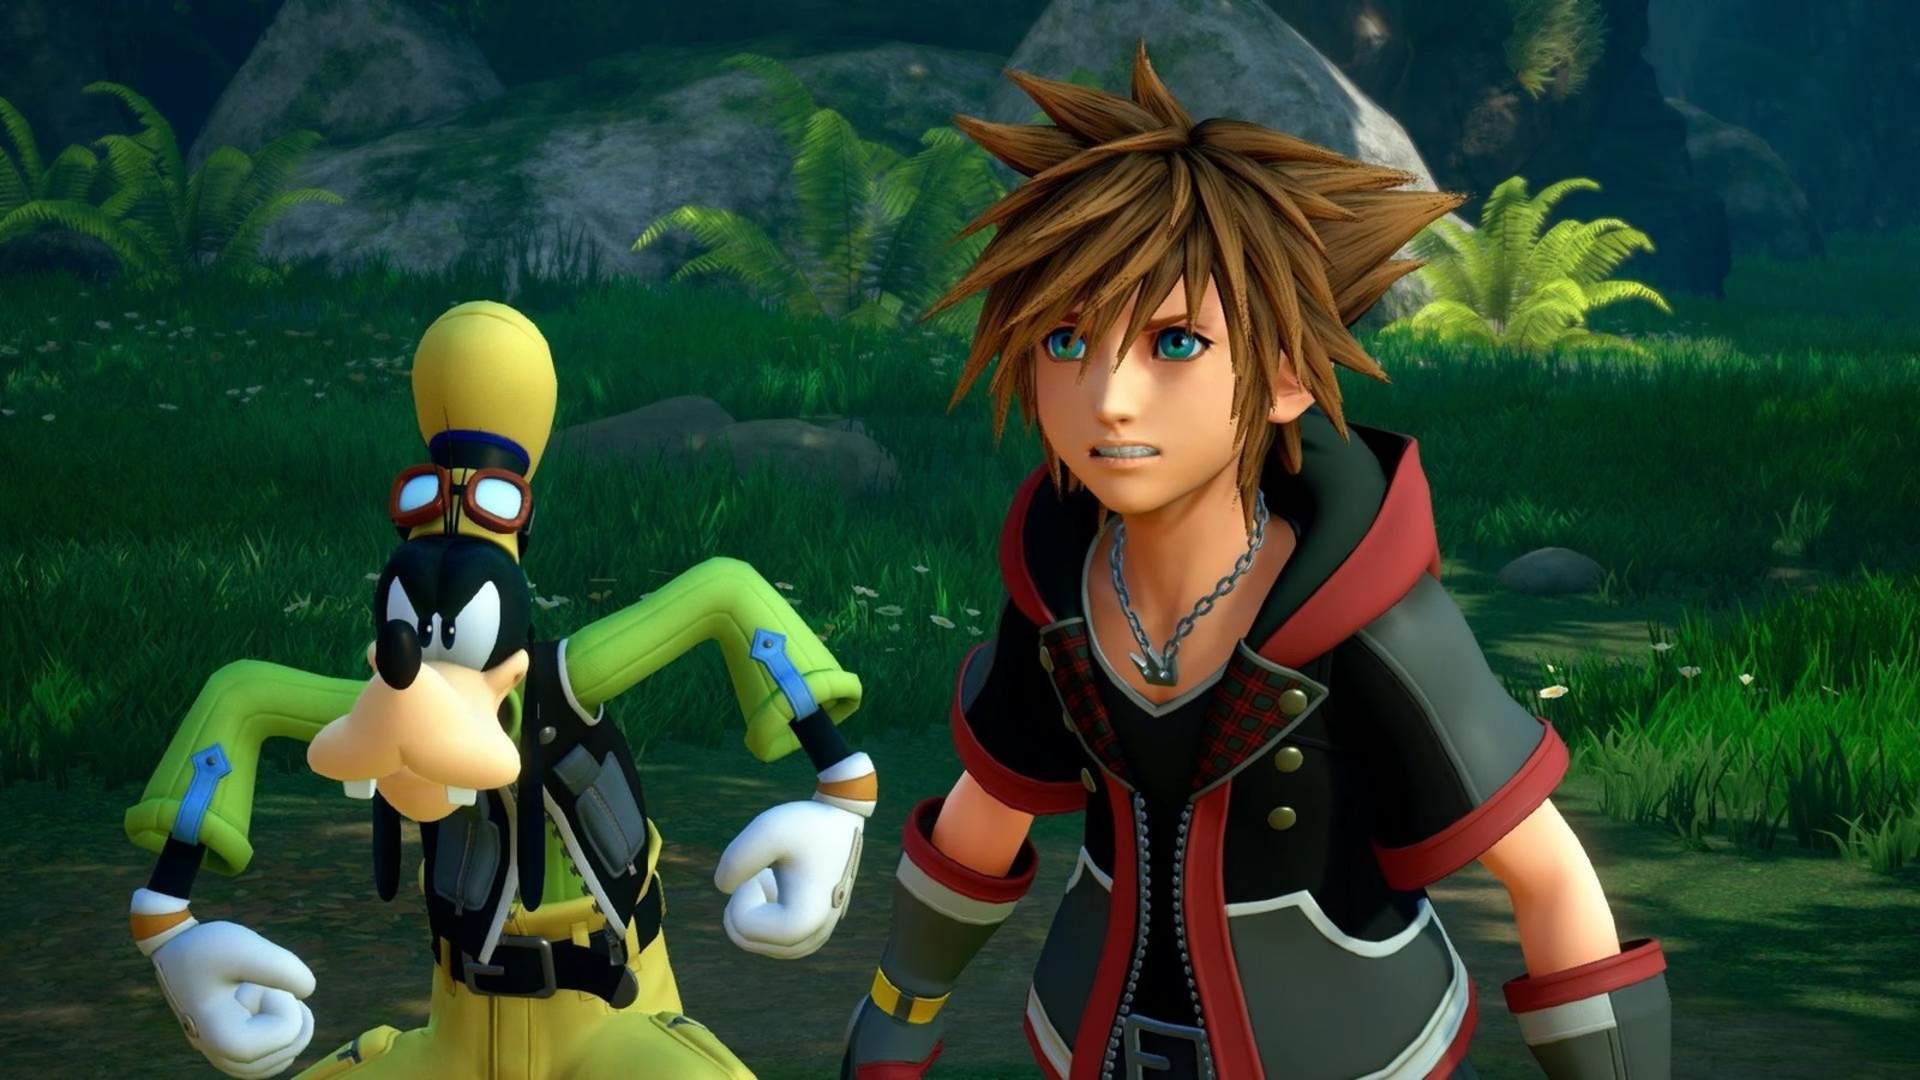 Goofy squares up like a tough guy with Sora next to him.